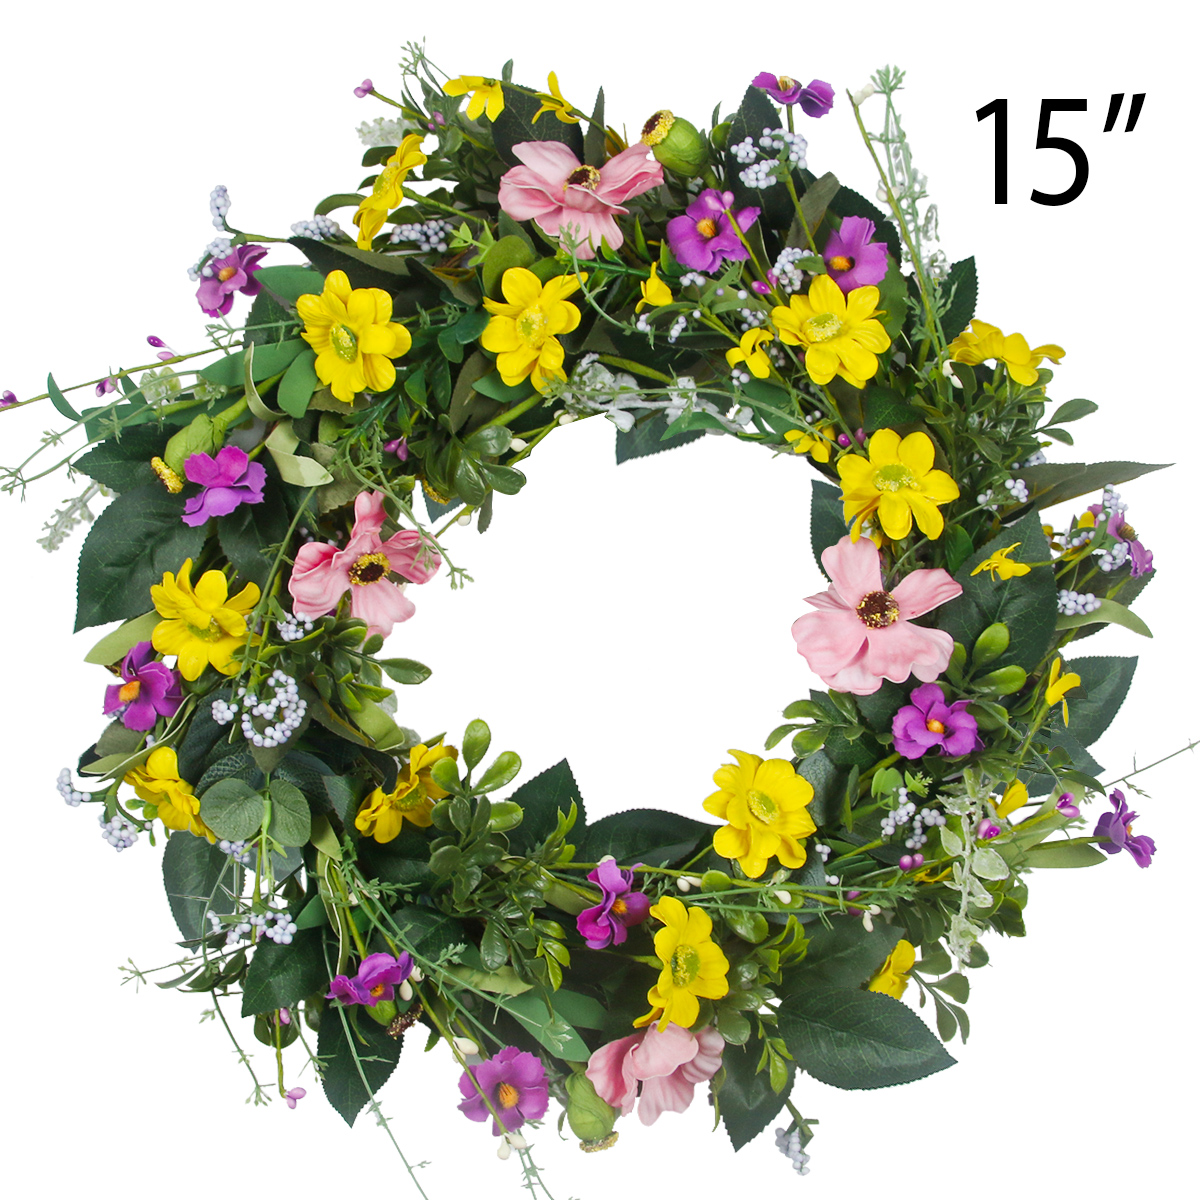 18 Diam Lush Mixed Artificial Floral LED Lighted Summer Door Wreath Decoration with Trailing Ivy